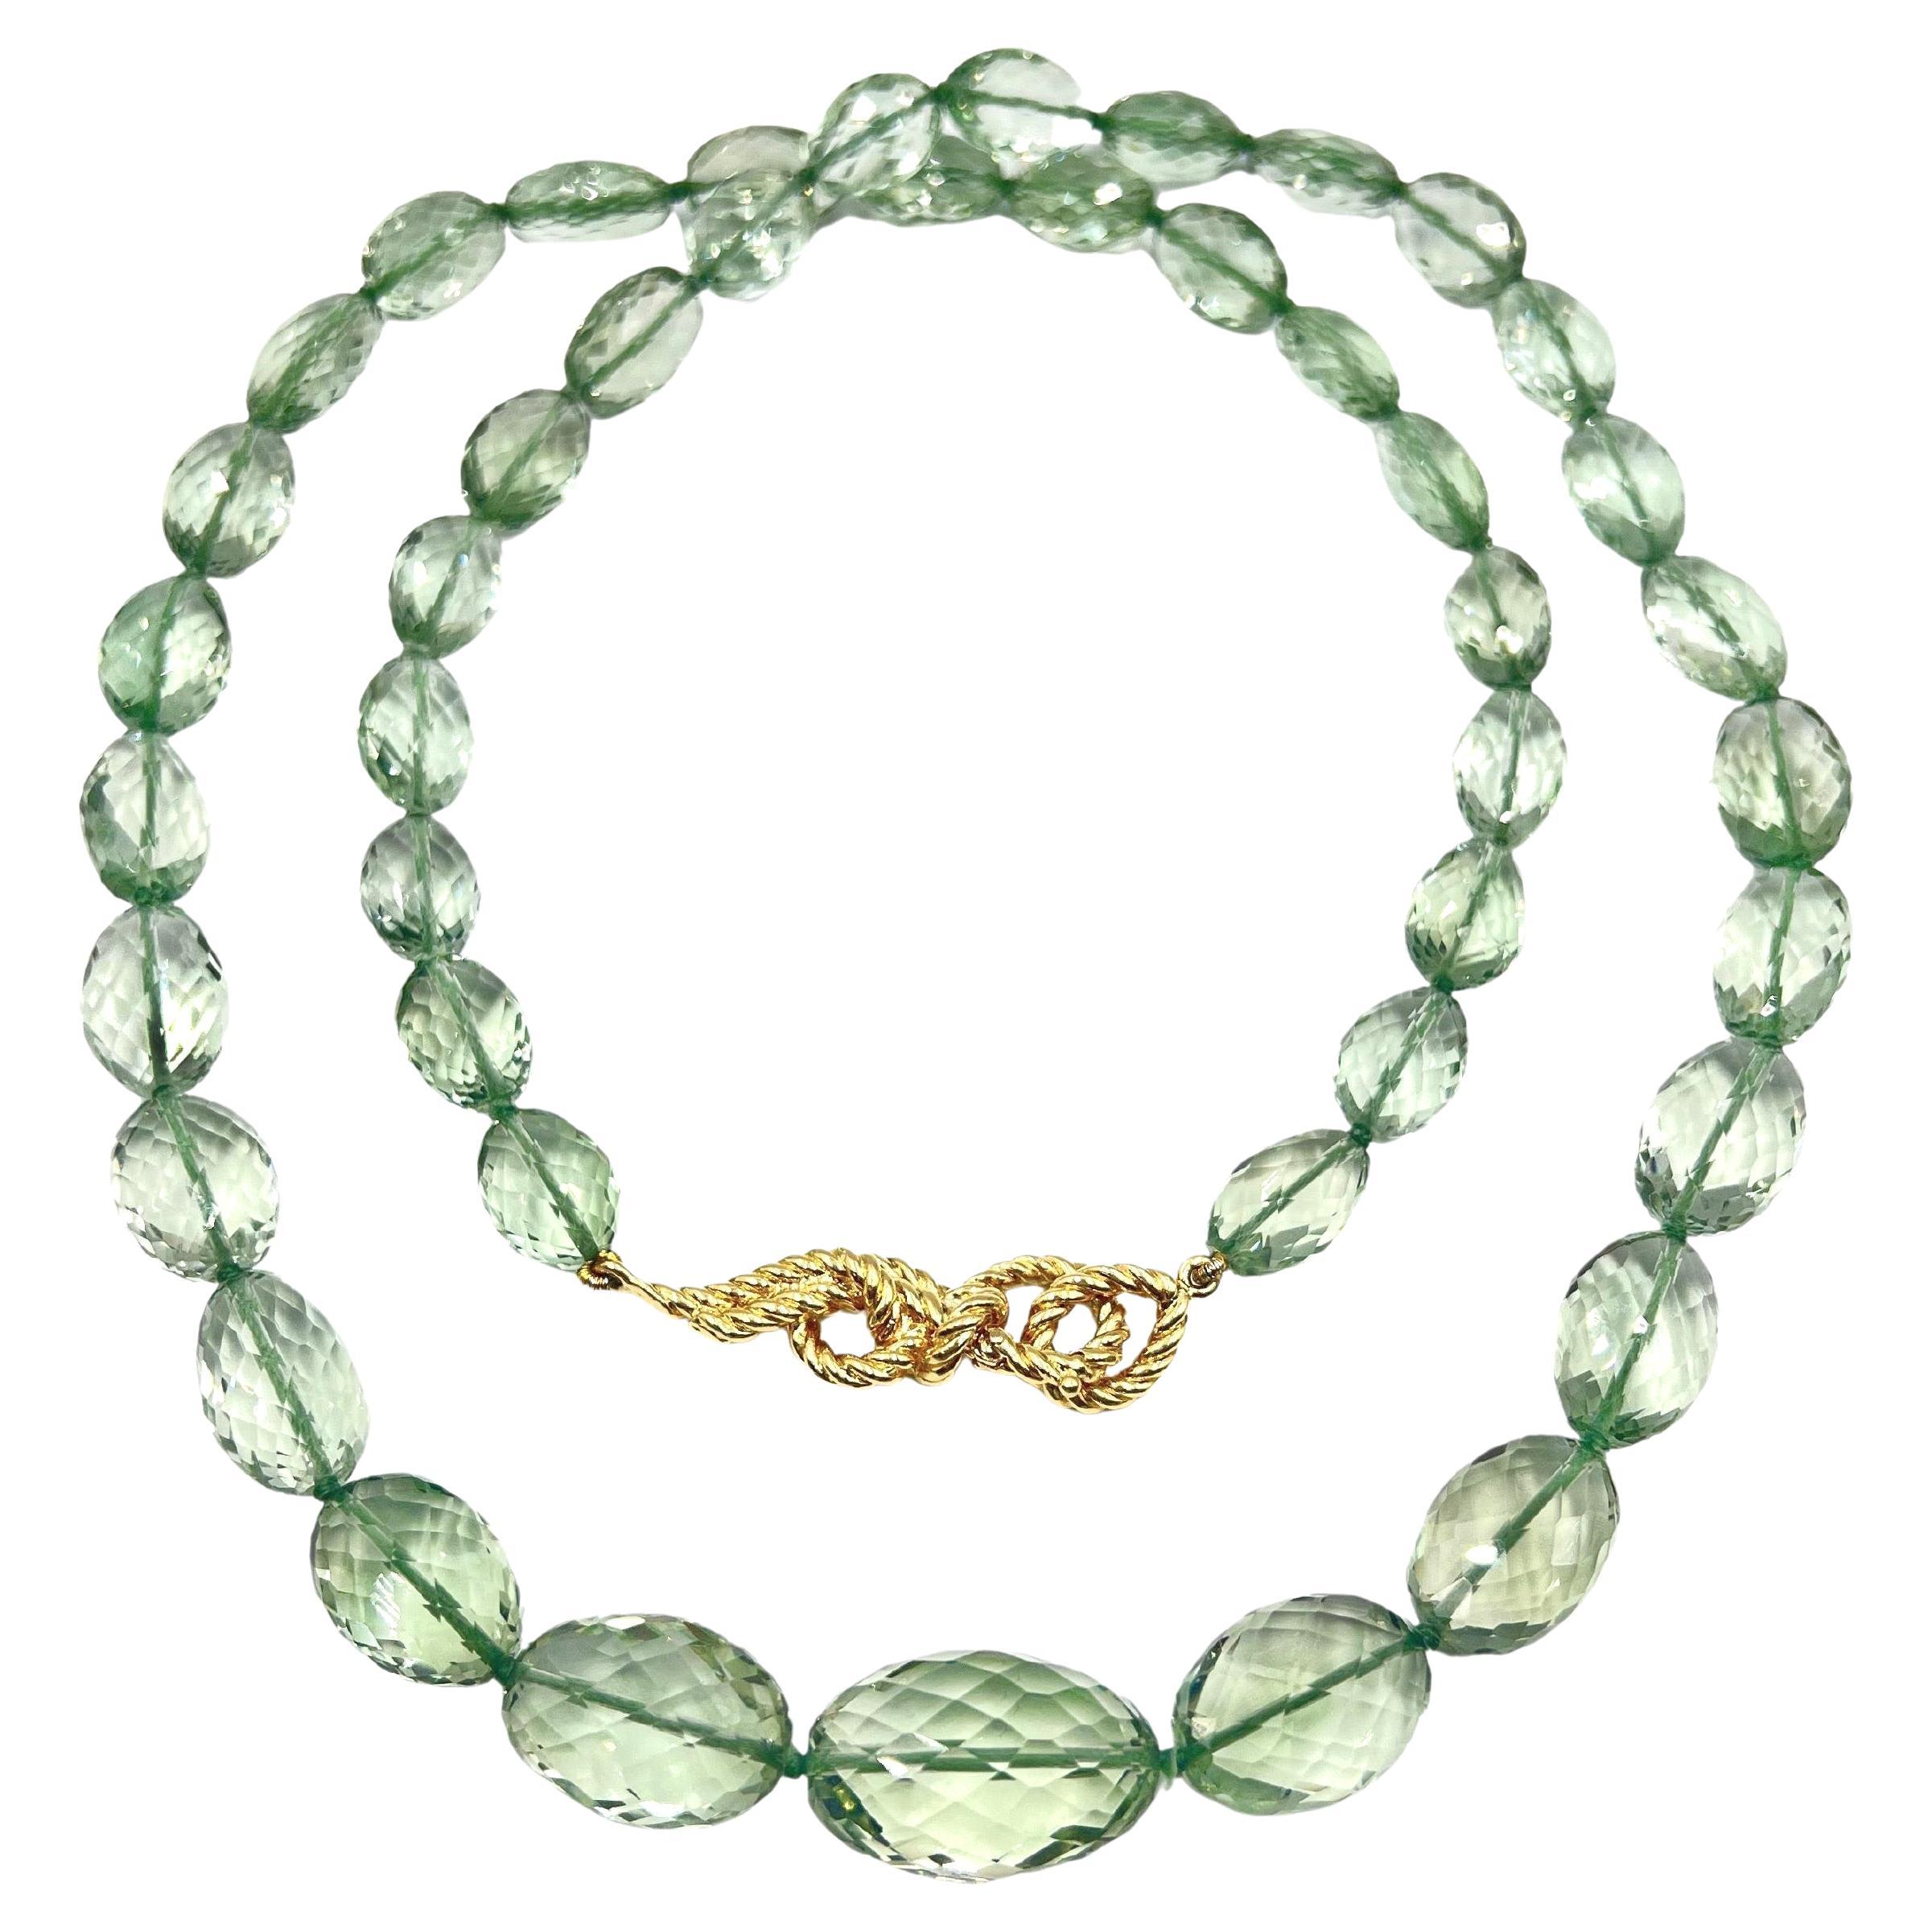 Verdura long necklace, featuring a single-strand of forty-five oval-shaped, faceted bluish-green prasiolite beads.  Beads measuring 15.75 in the center and tapering to 9-11mm at the back.  Knotted in between each bead.  Knot rope-style clasp which